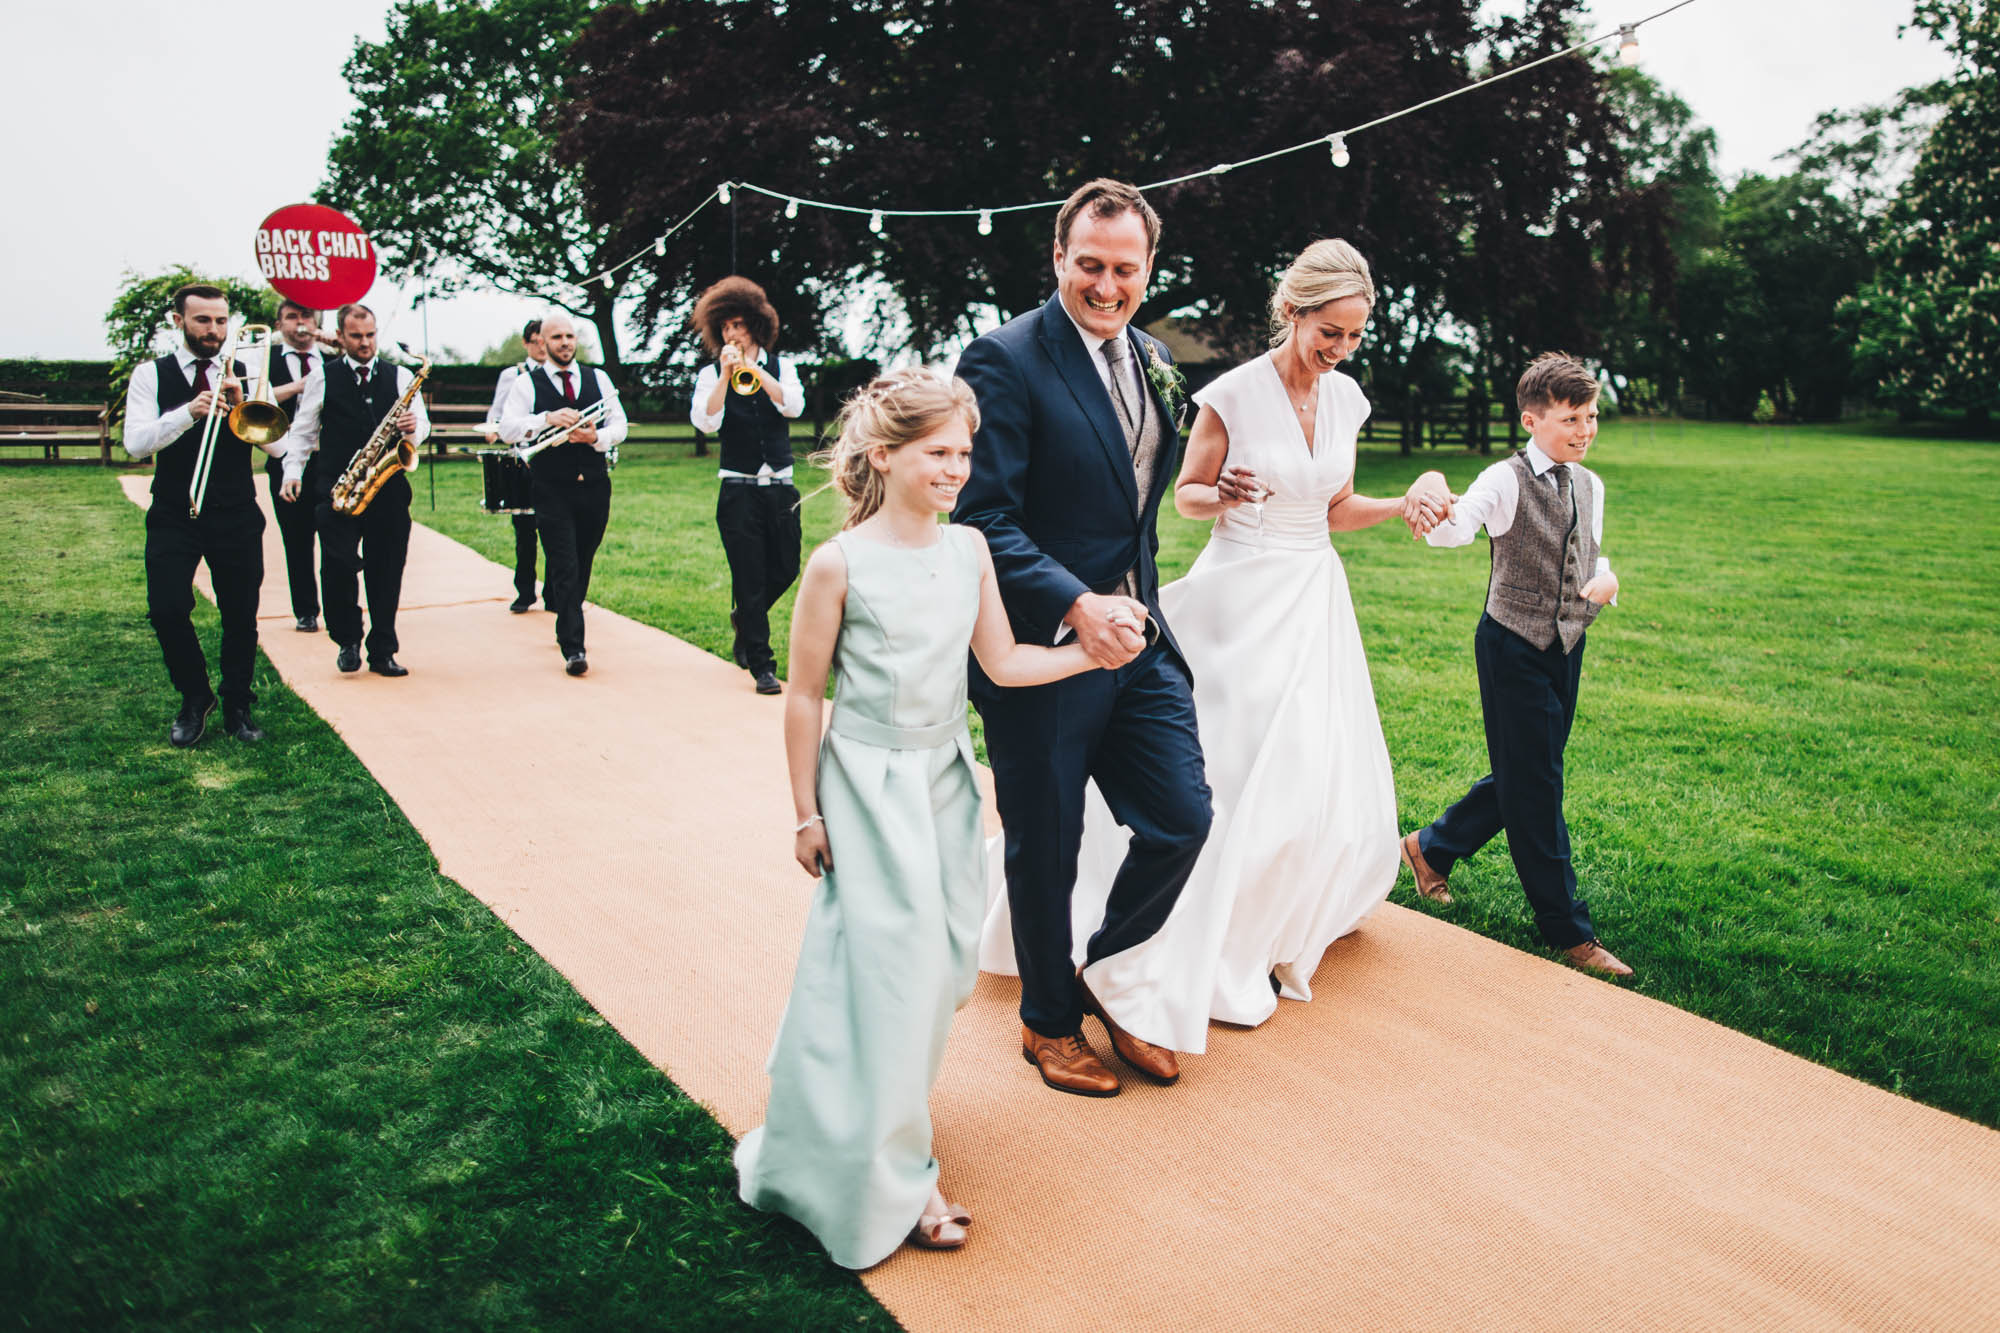 family enter the wedding reception marquee followed by a band